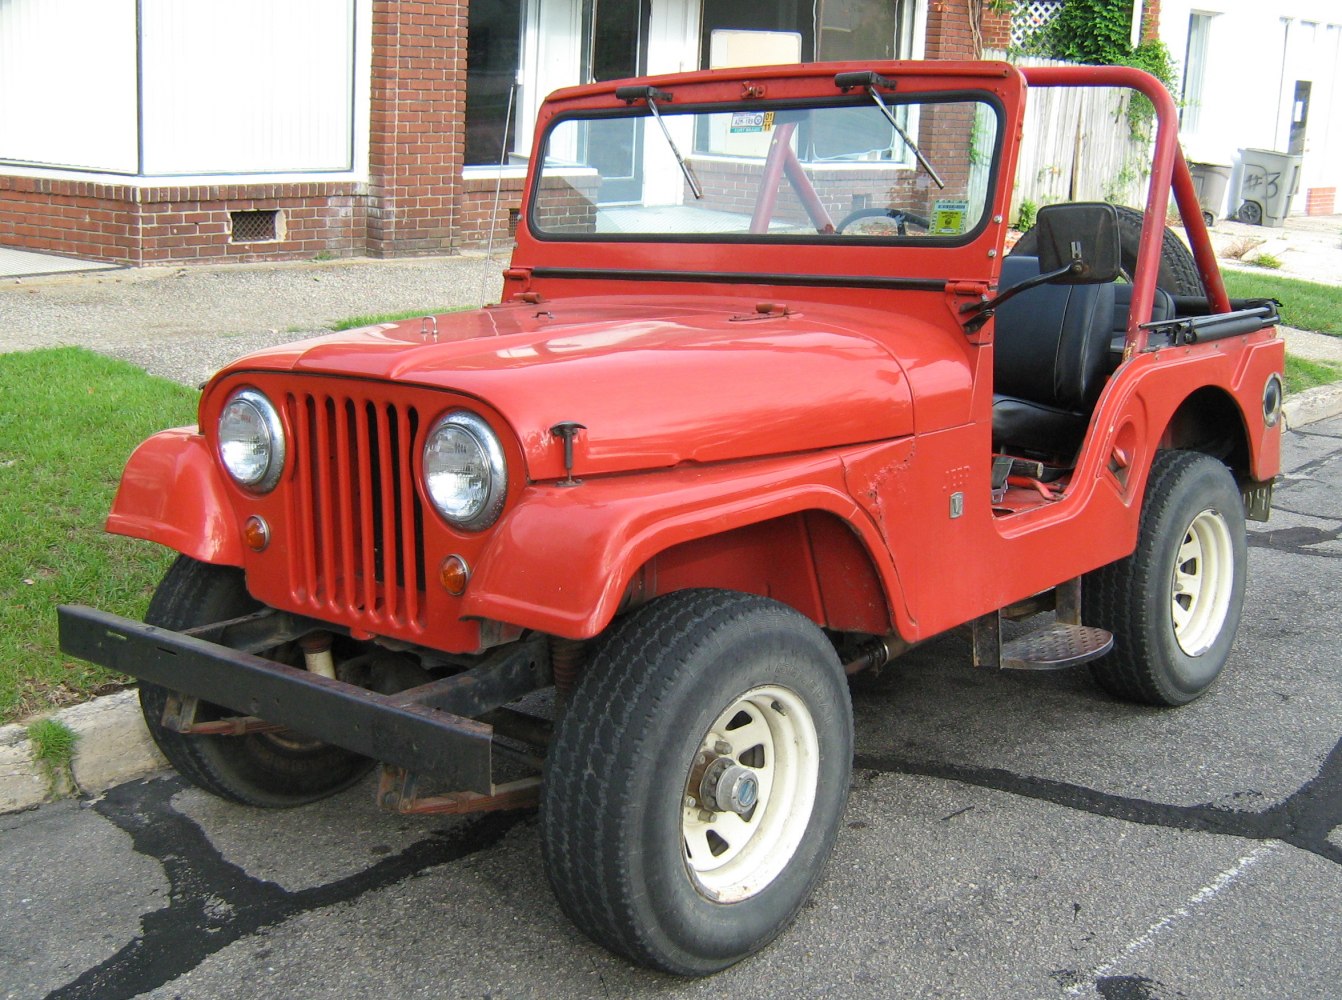 https://totalrenting.es/wp-content/uploads/2022/10/jeep-cj-5-1955-2-0-85-cv-todoterreno.png